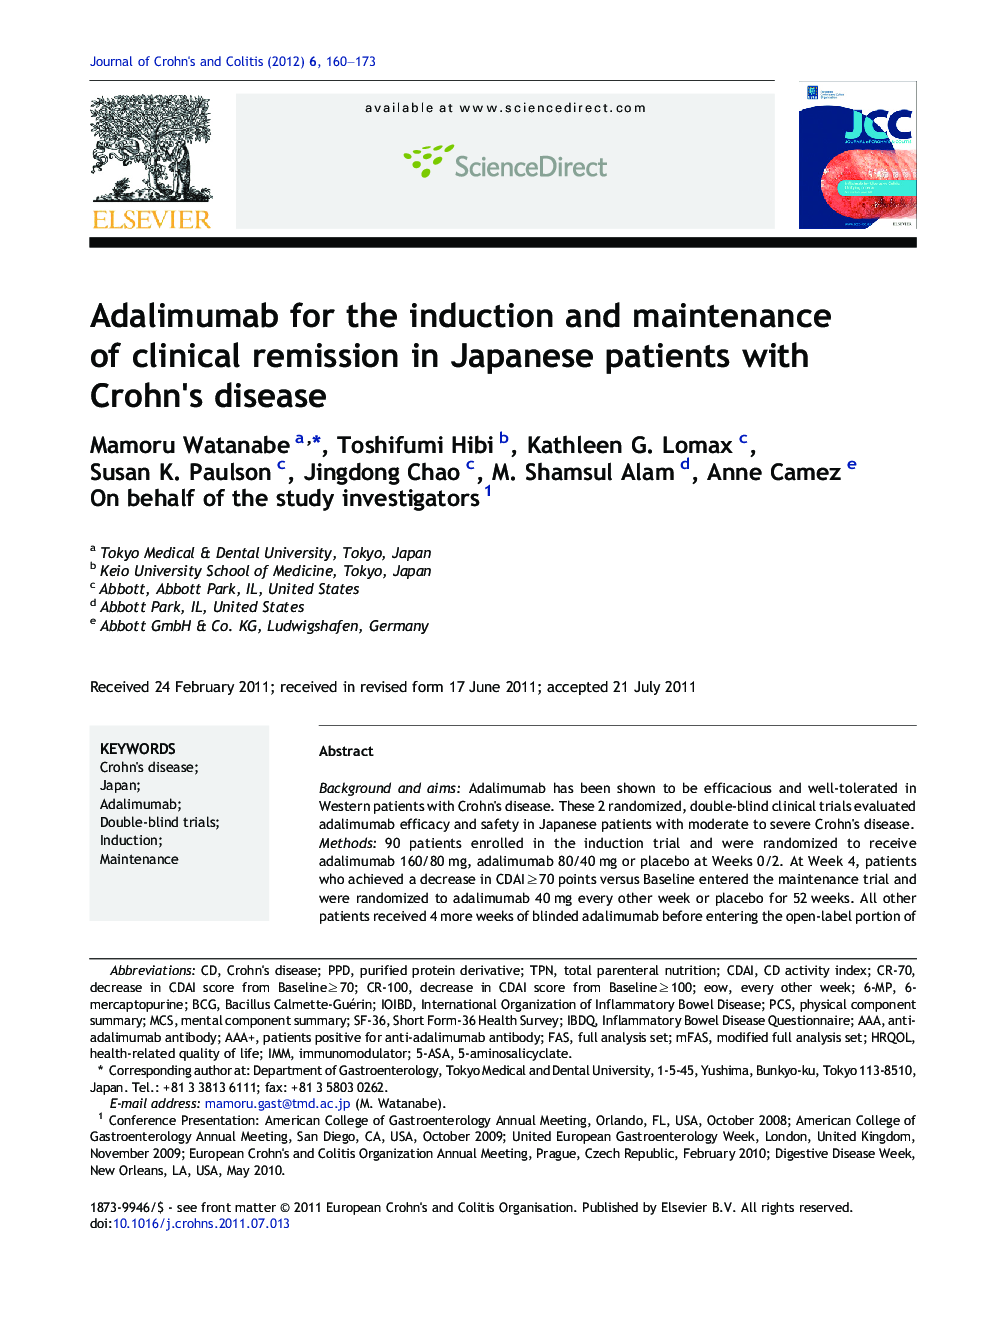 Adalimumab for the induction and maintenance of clinical remission in Japanese patients with Crohn's disease